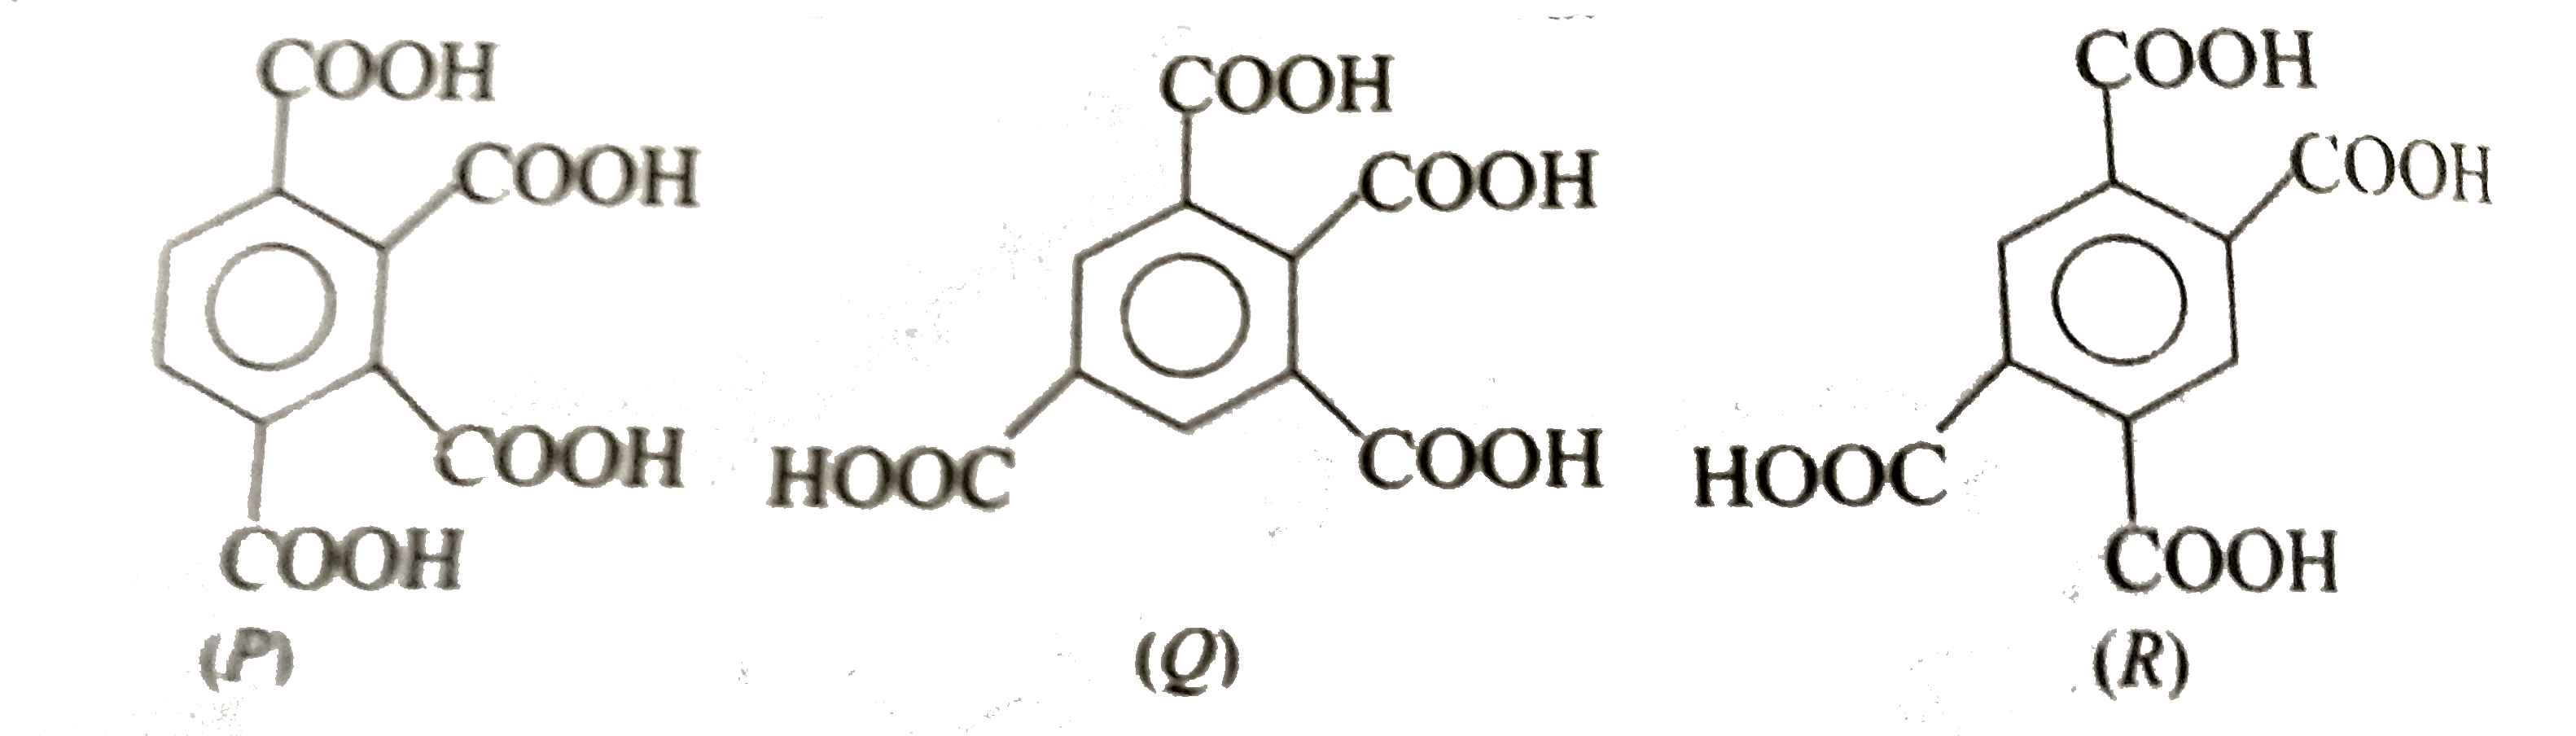 There are three isomeric tetracarboxylic acid.       Which of these form two isomeric monoanhydrides ?